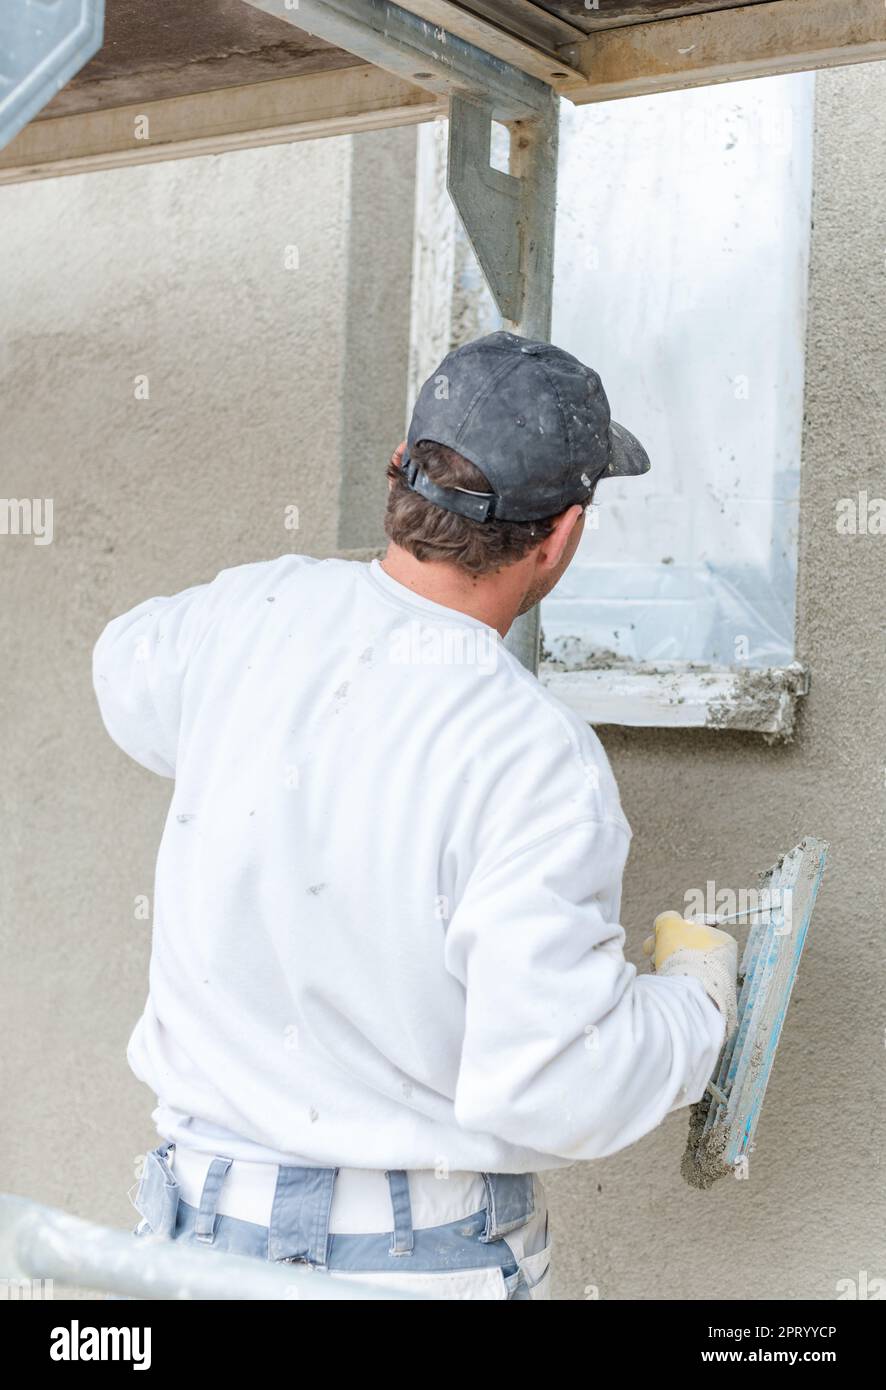 Plasterer smoothing plaster on a facade standing on scaffold Stock Photo